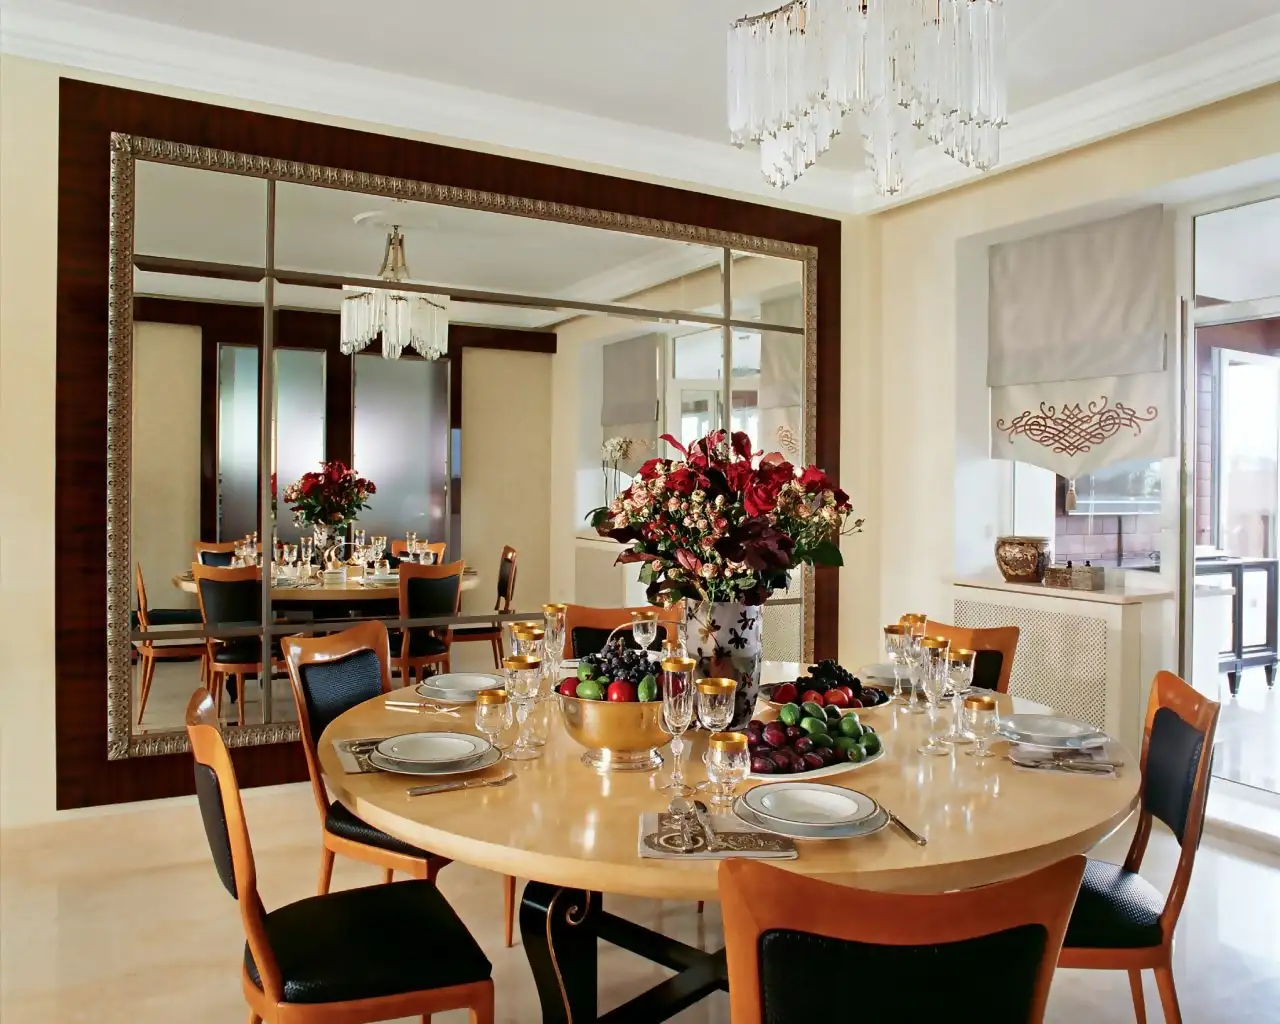 Dining Room Styles